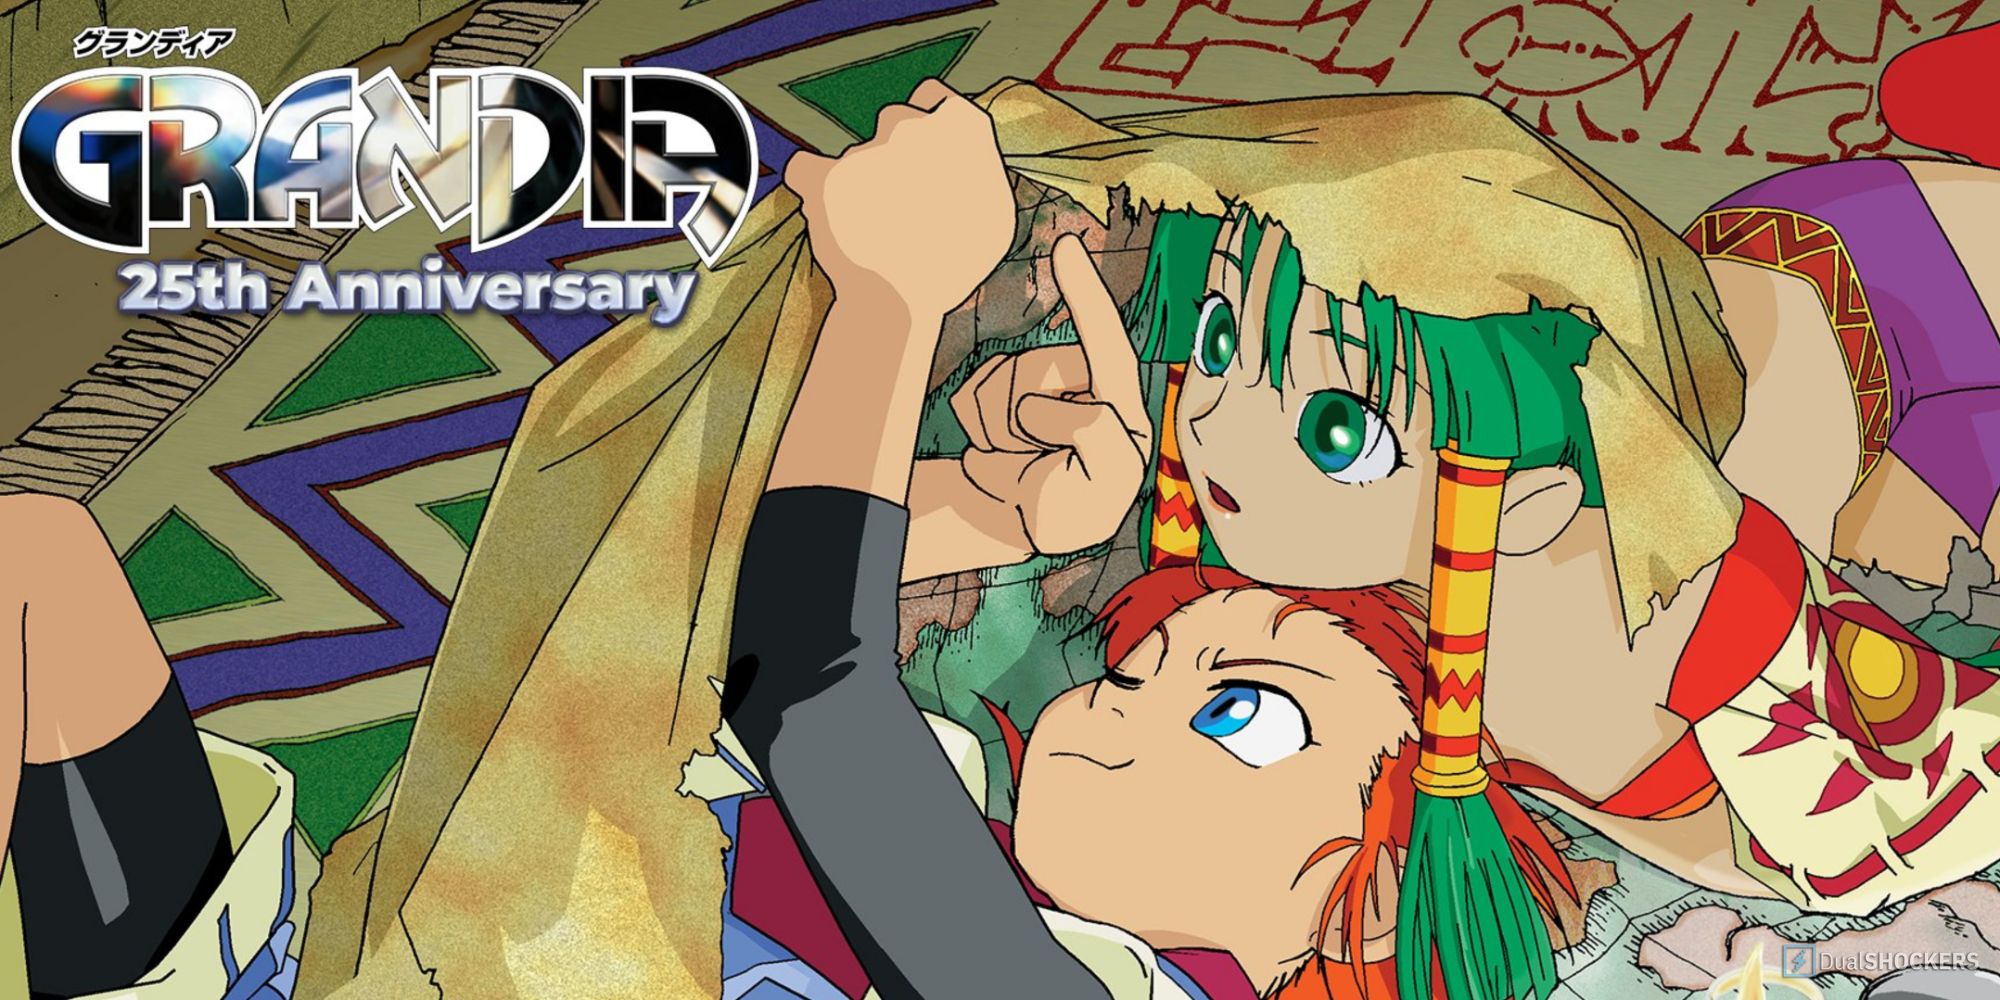 Banner for the 25th Anniversary of Grandia, showing Justin and Feena